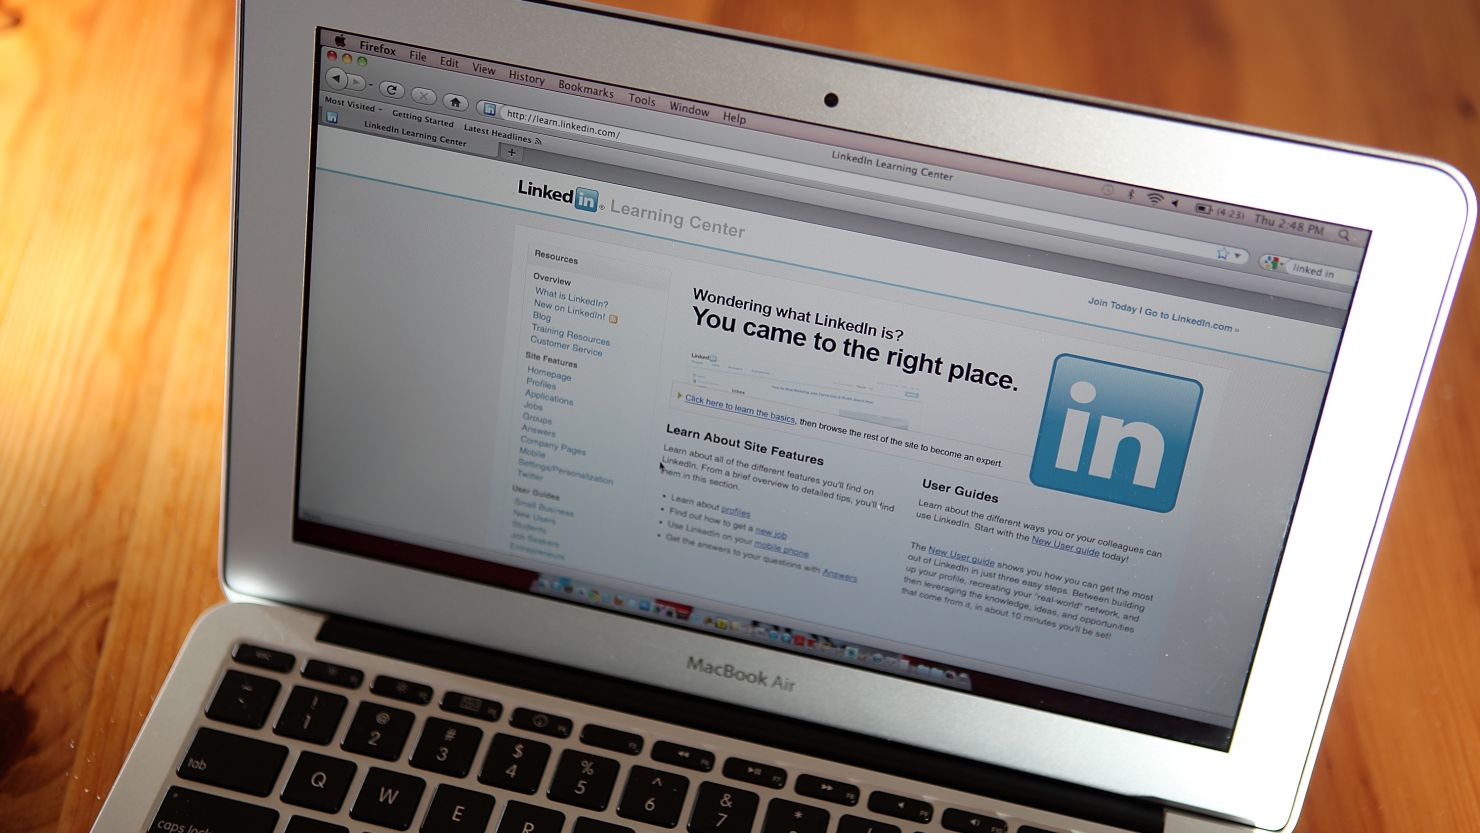 Linkedin, perhaps the world's most successful professional networking site, has expanded into China.